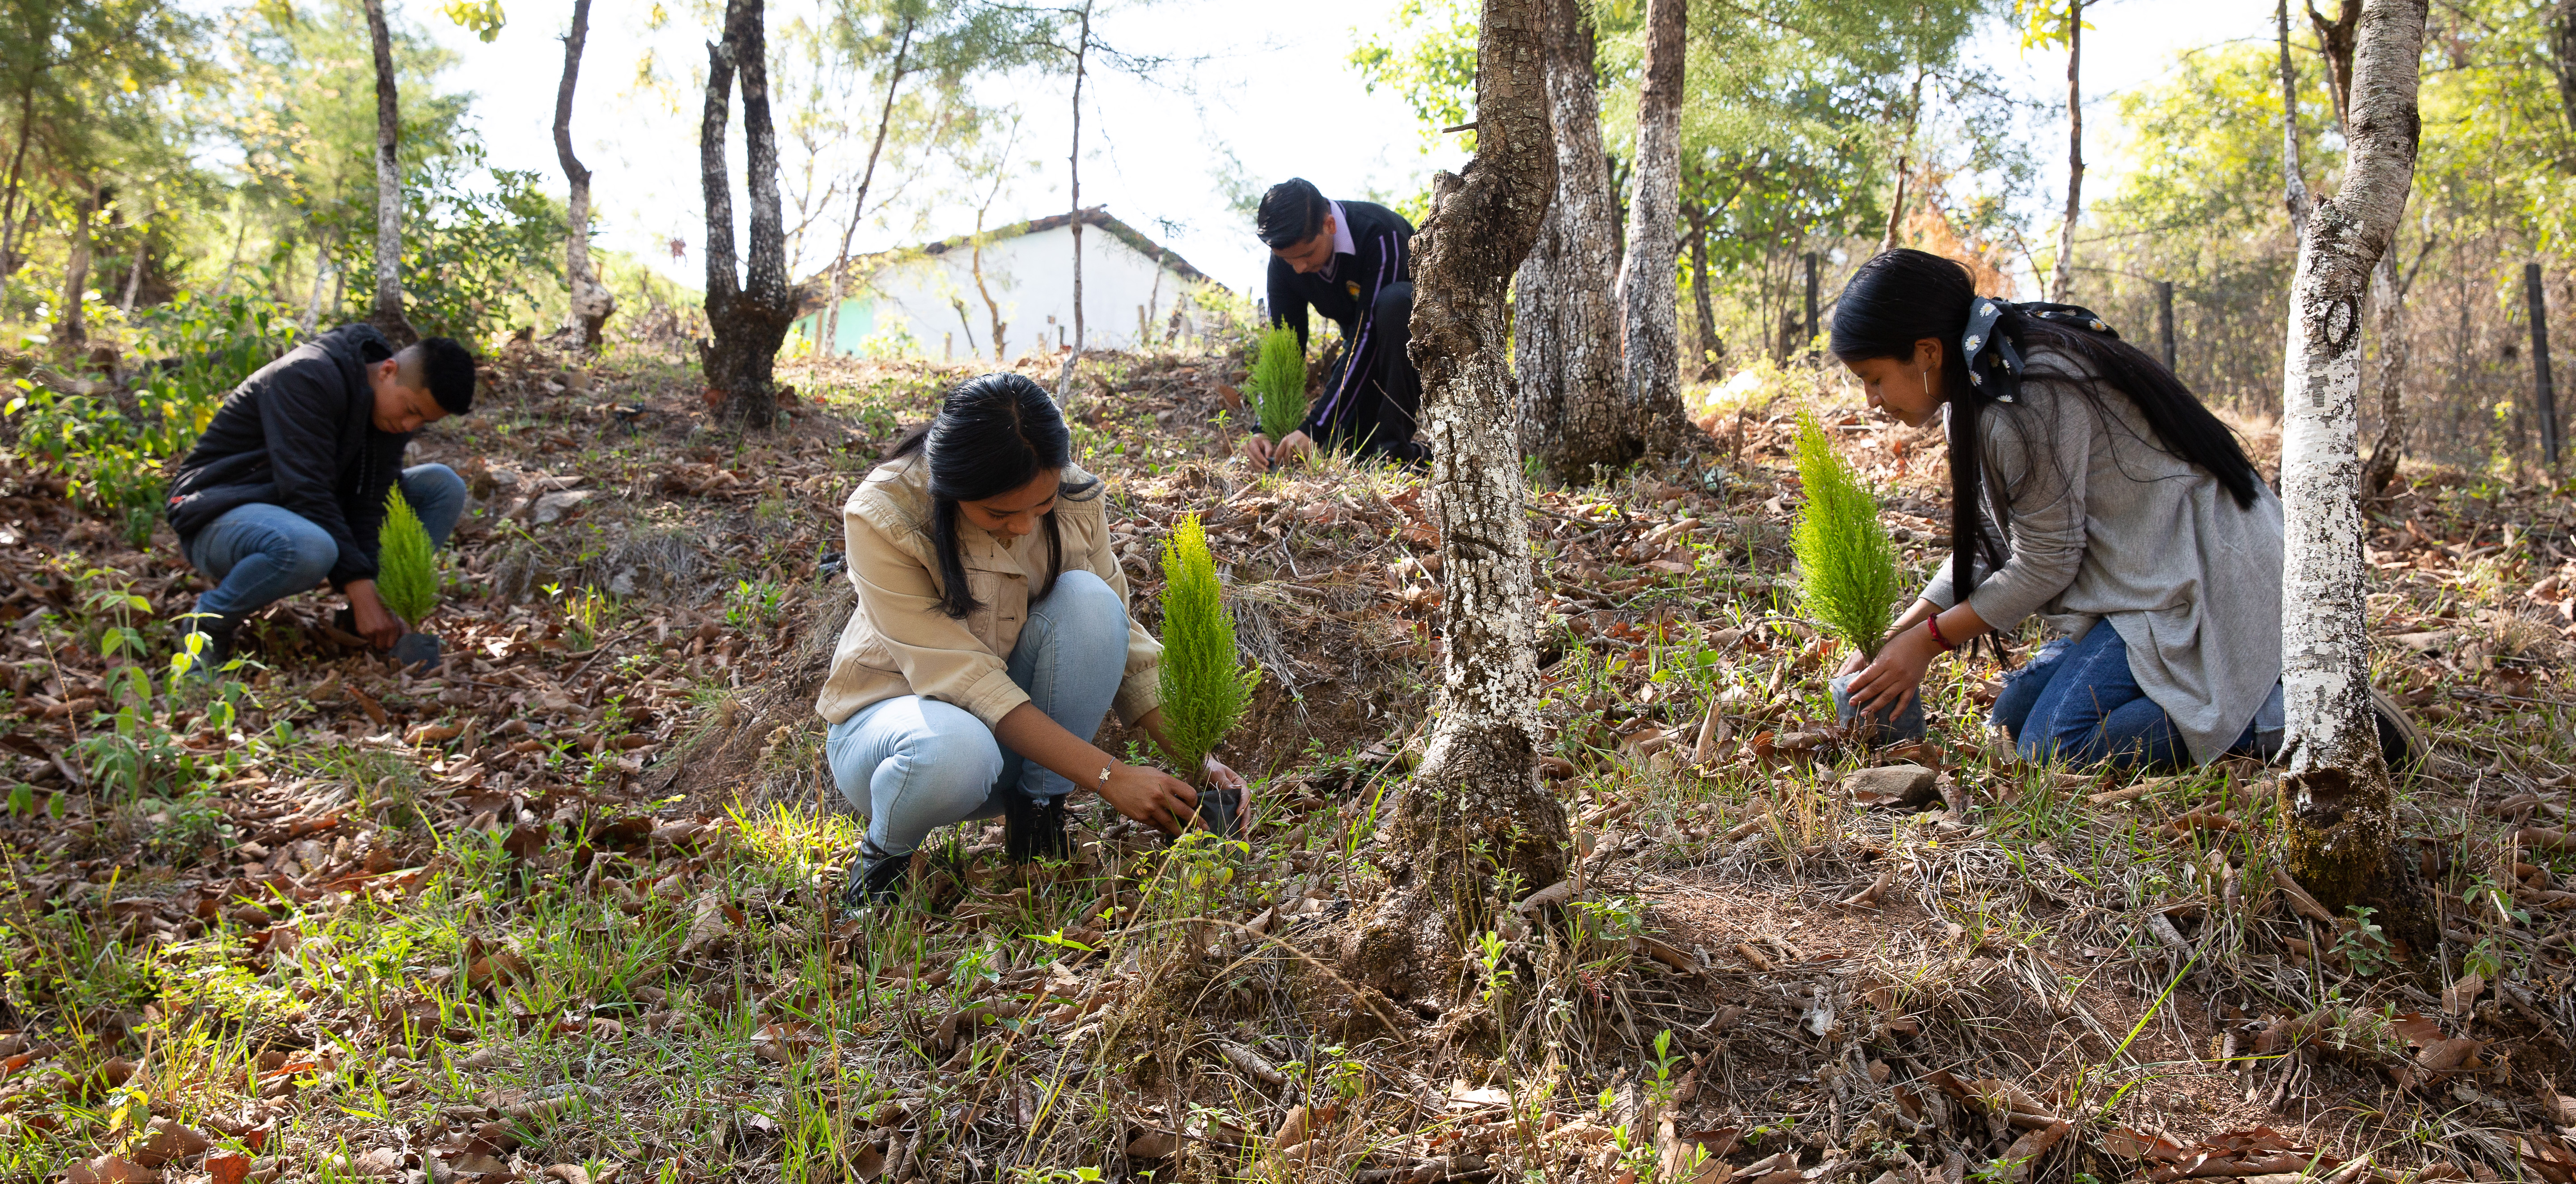 Four people planting trees in a forest.